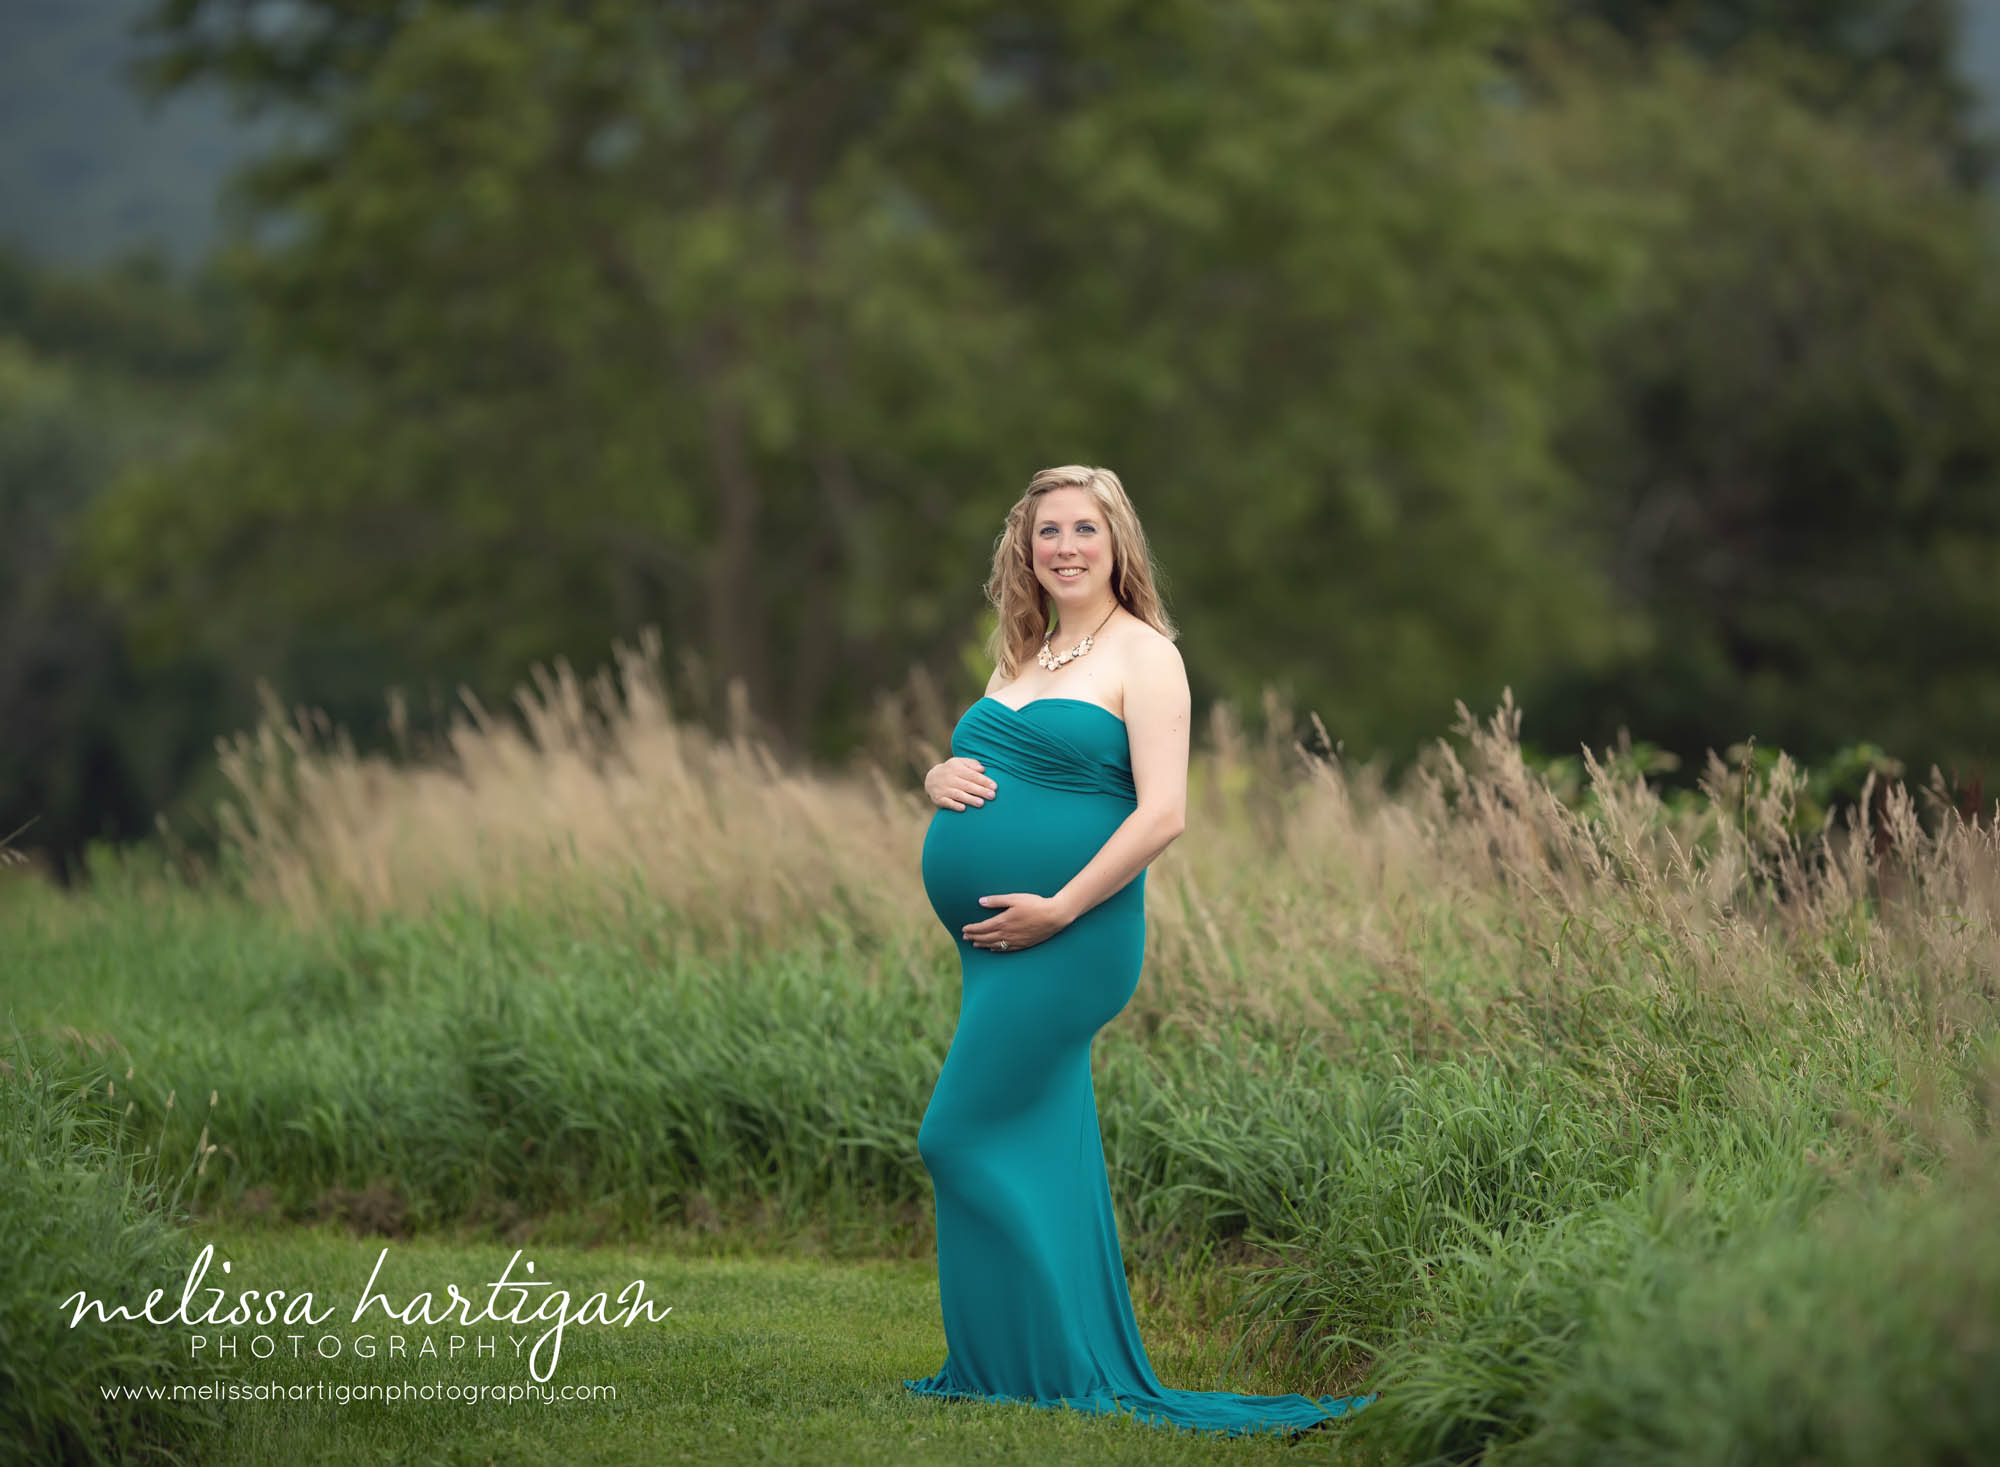 Expectant mother standing in grassy field area wearing peacock blue turquoise long fitted maternity dress sweetheart neckline maternity photographer columbia CT